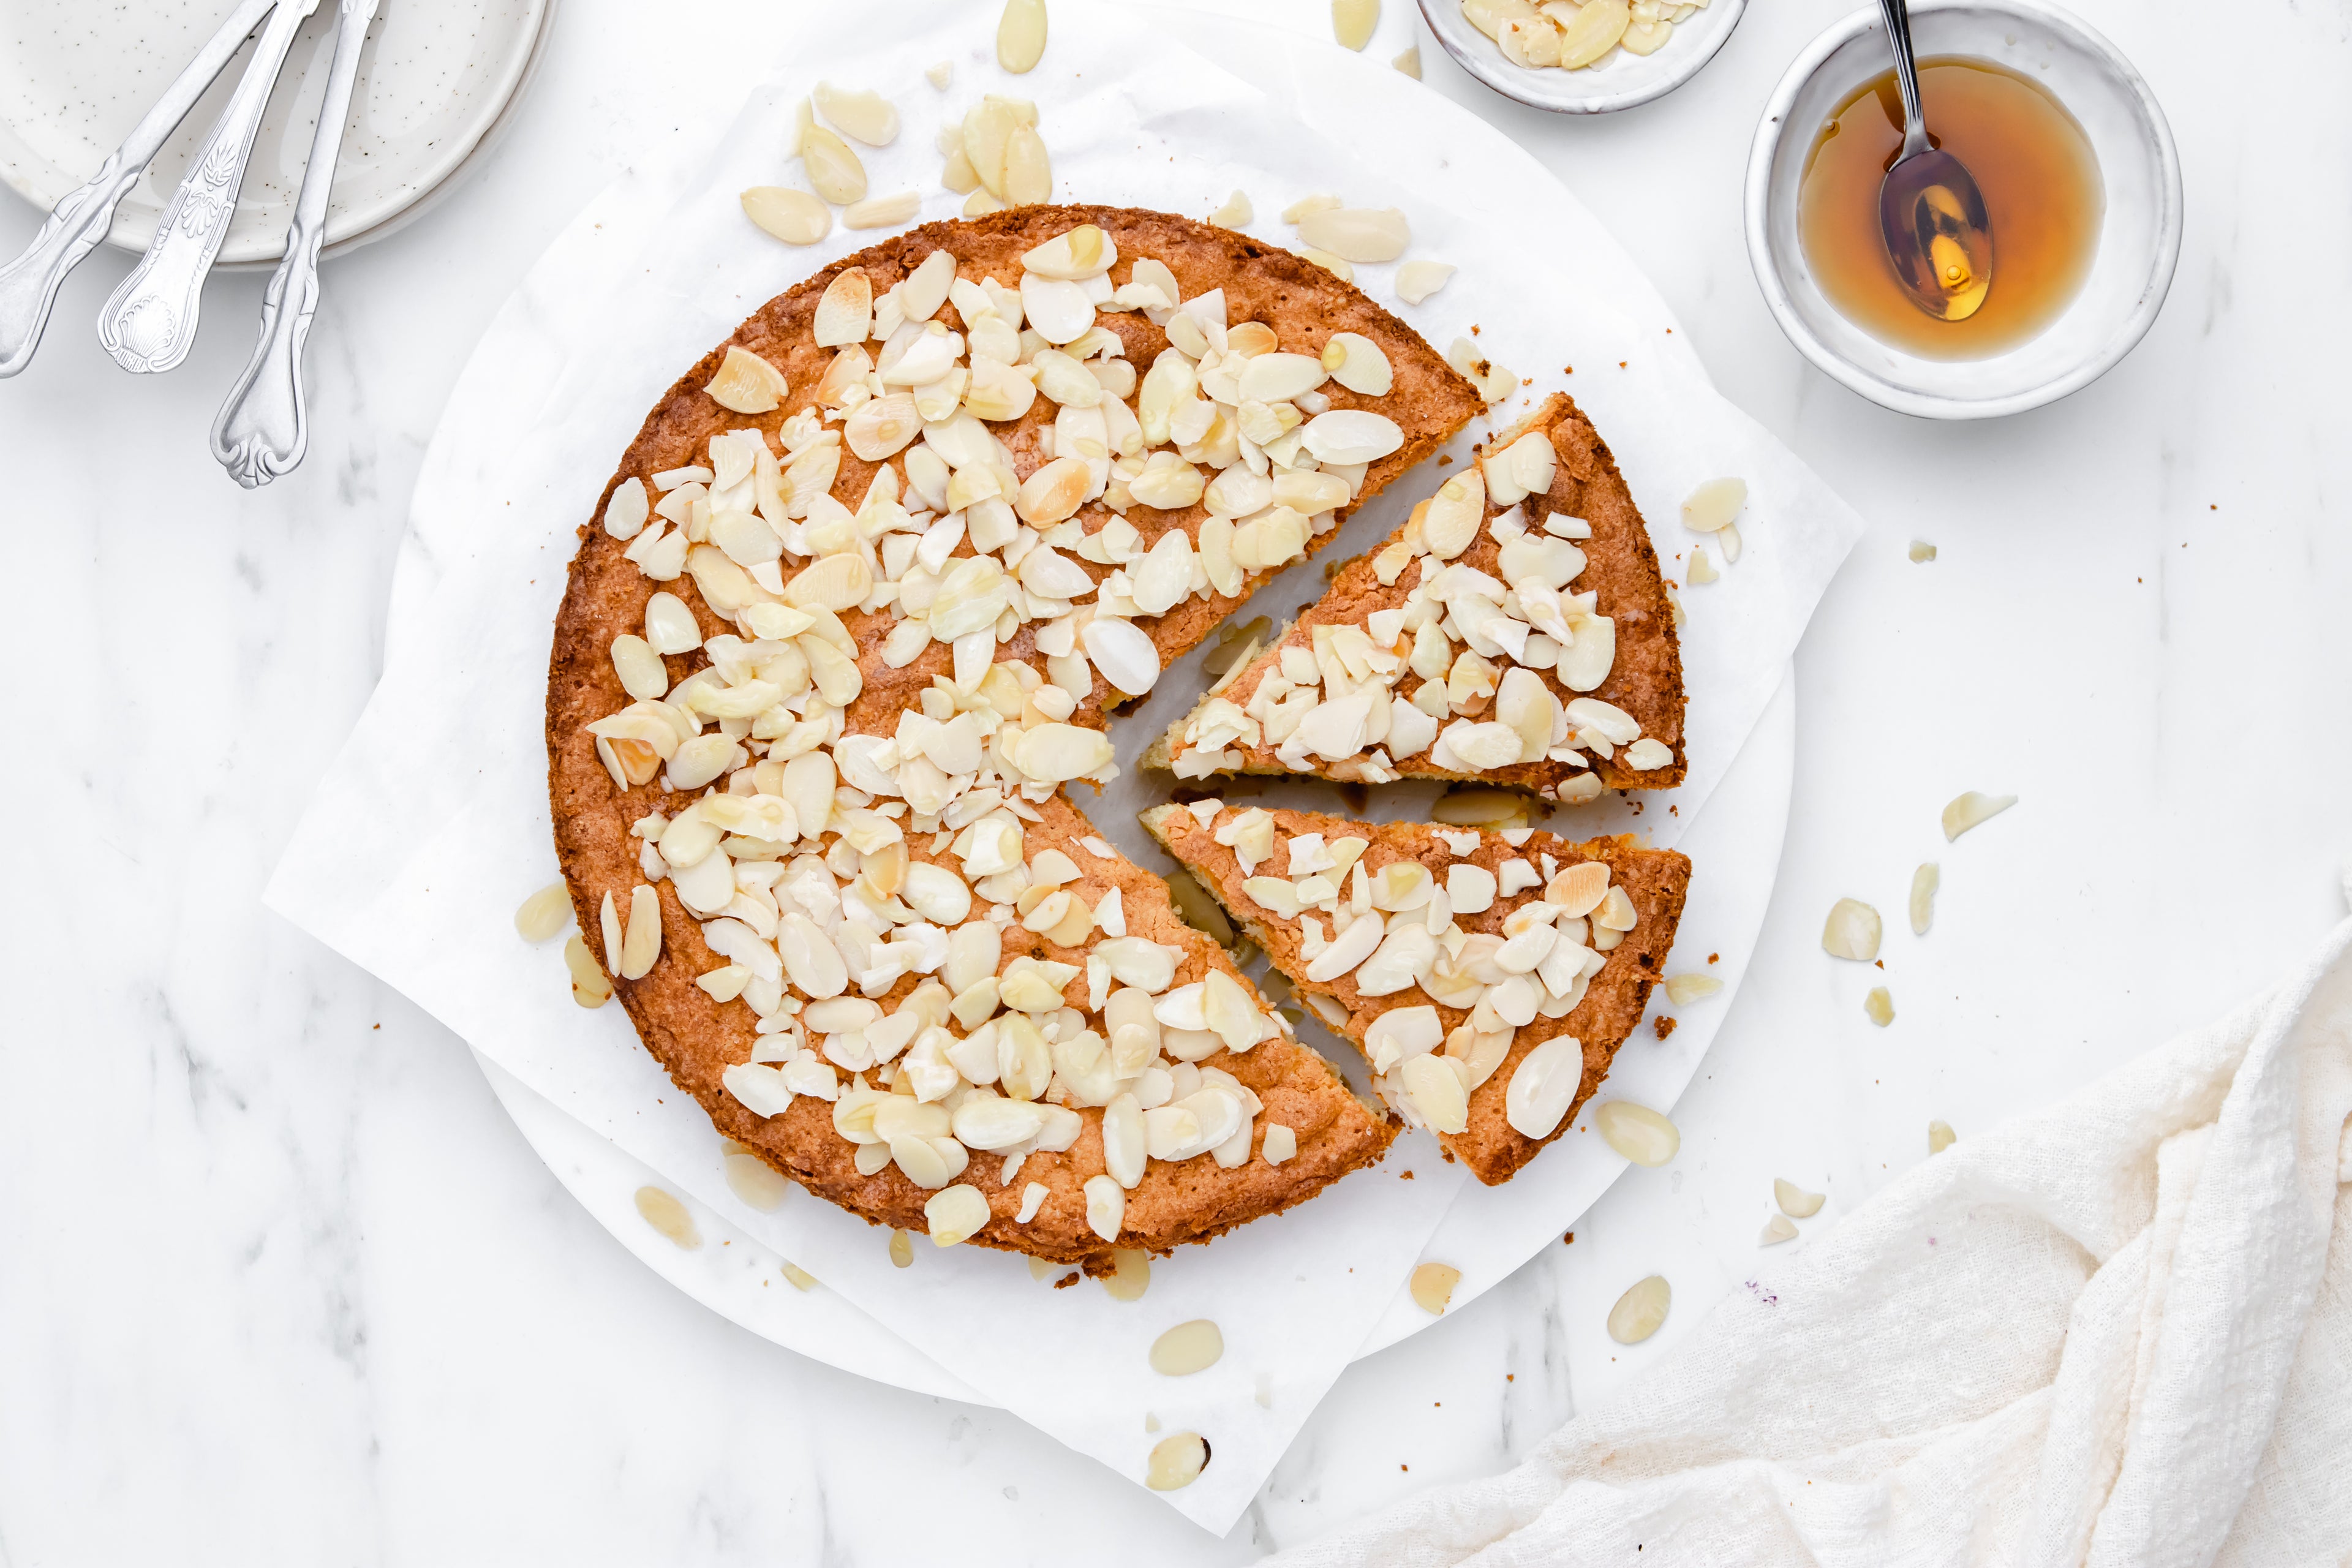 Almond cake with two slices cut out, sprinkled with almonds 